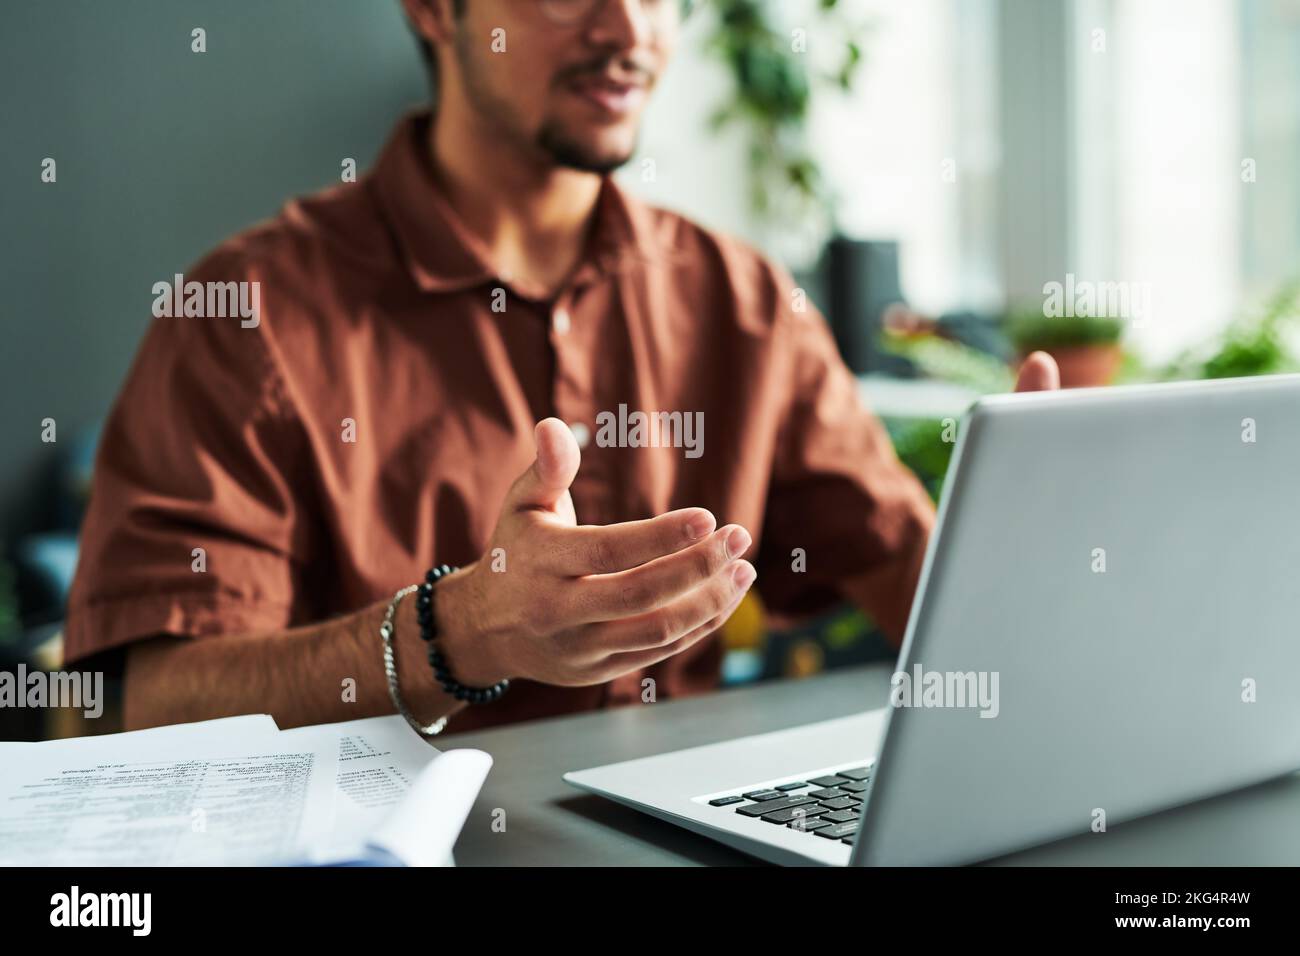 Focus on hand of young male tutor or student explaining something during online lesson while sitting by desk in front of laptop screen Stock Photo